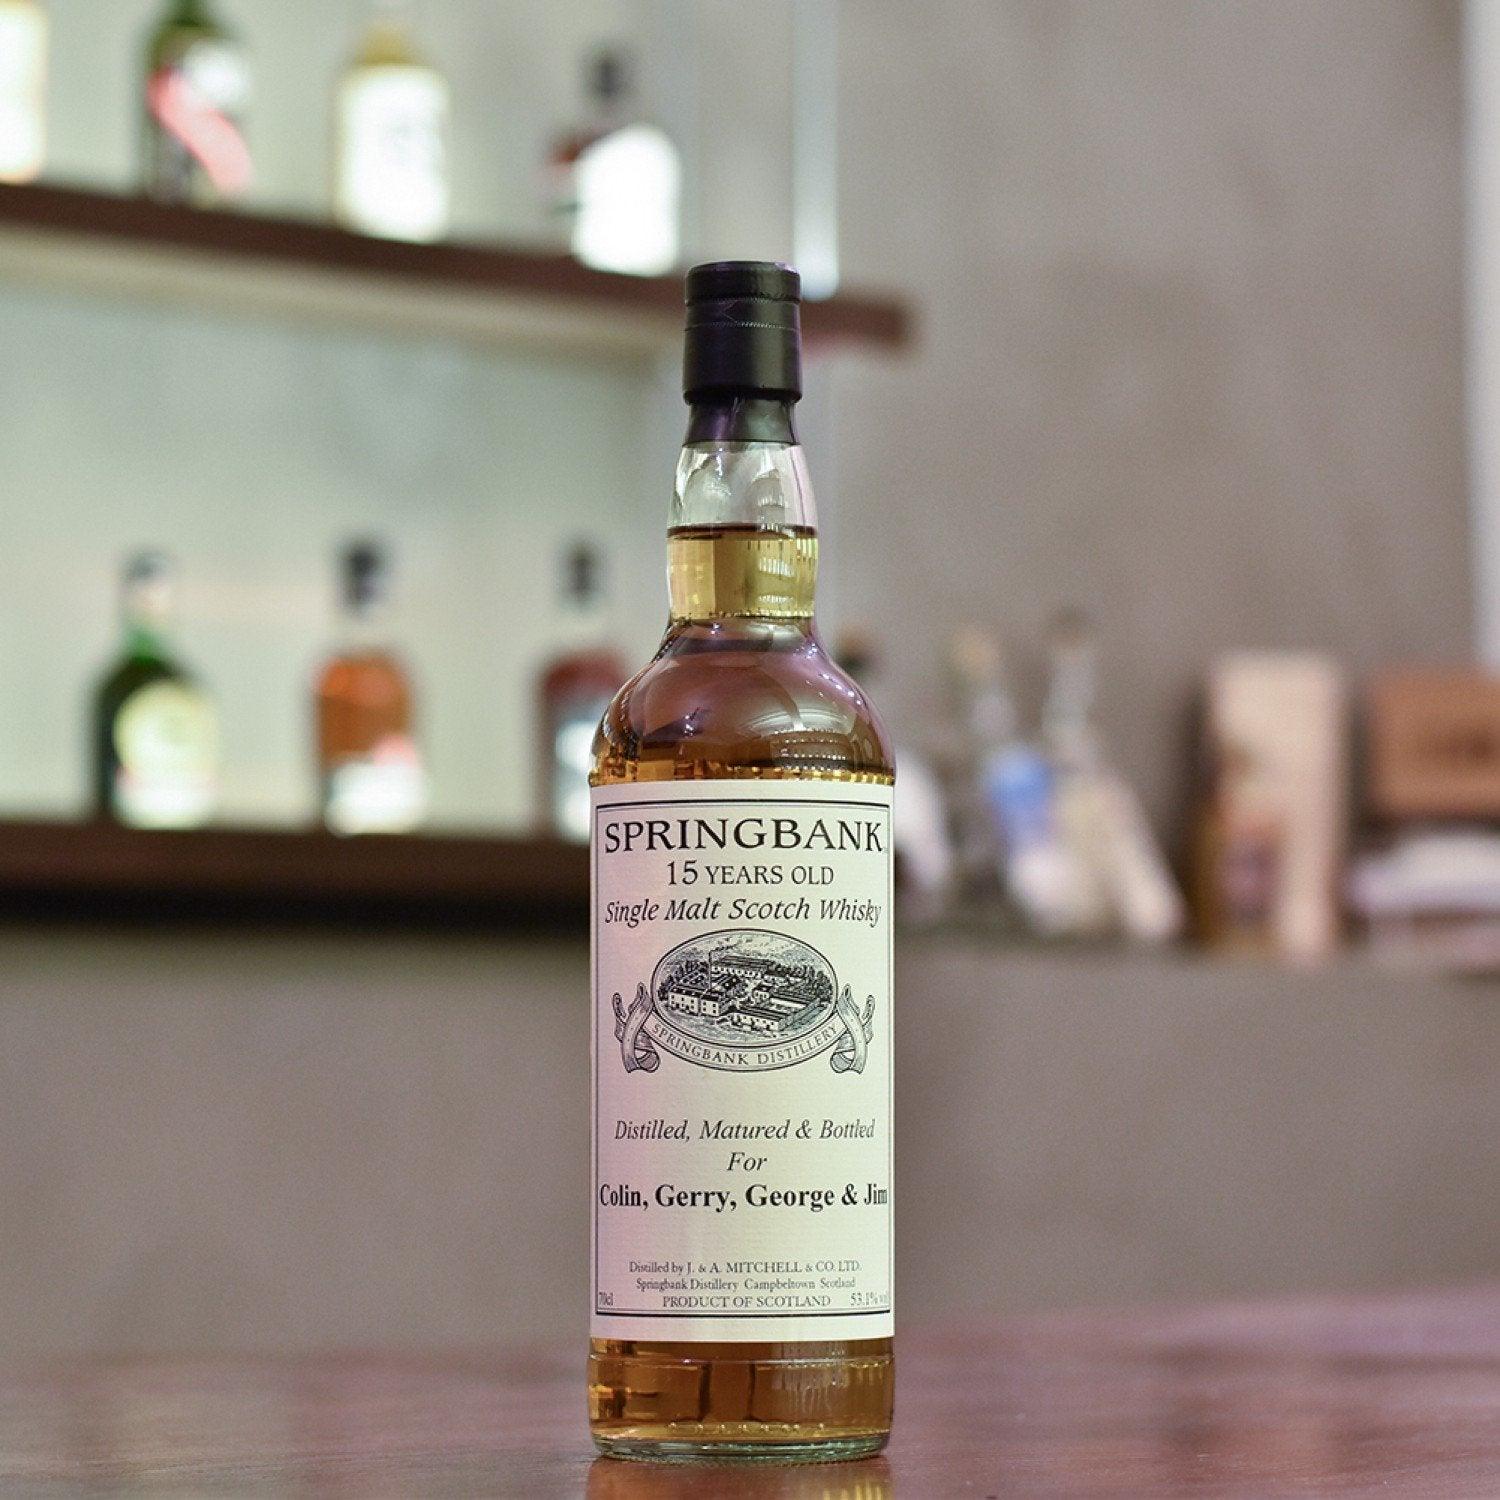 Springbank 15 Year Old 1993 Private Cask 537 - The Rare Malt